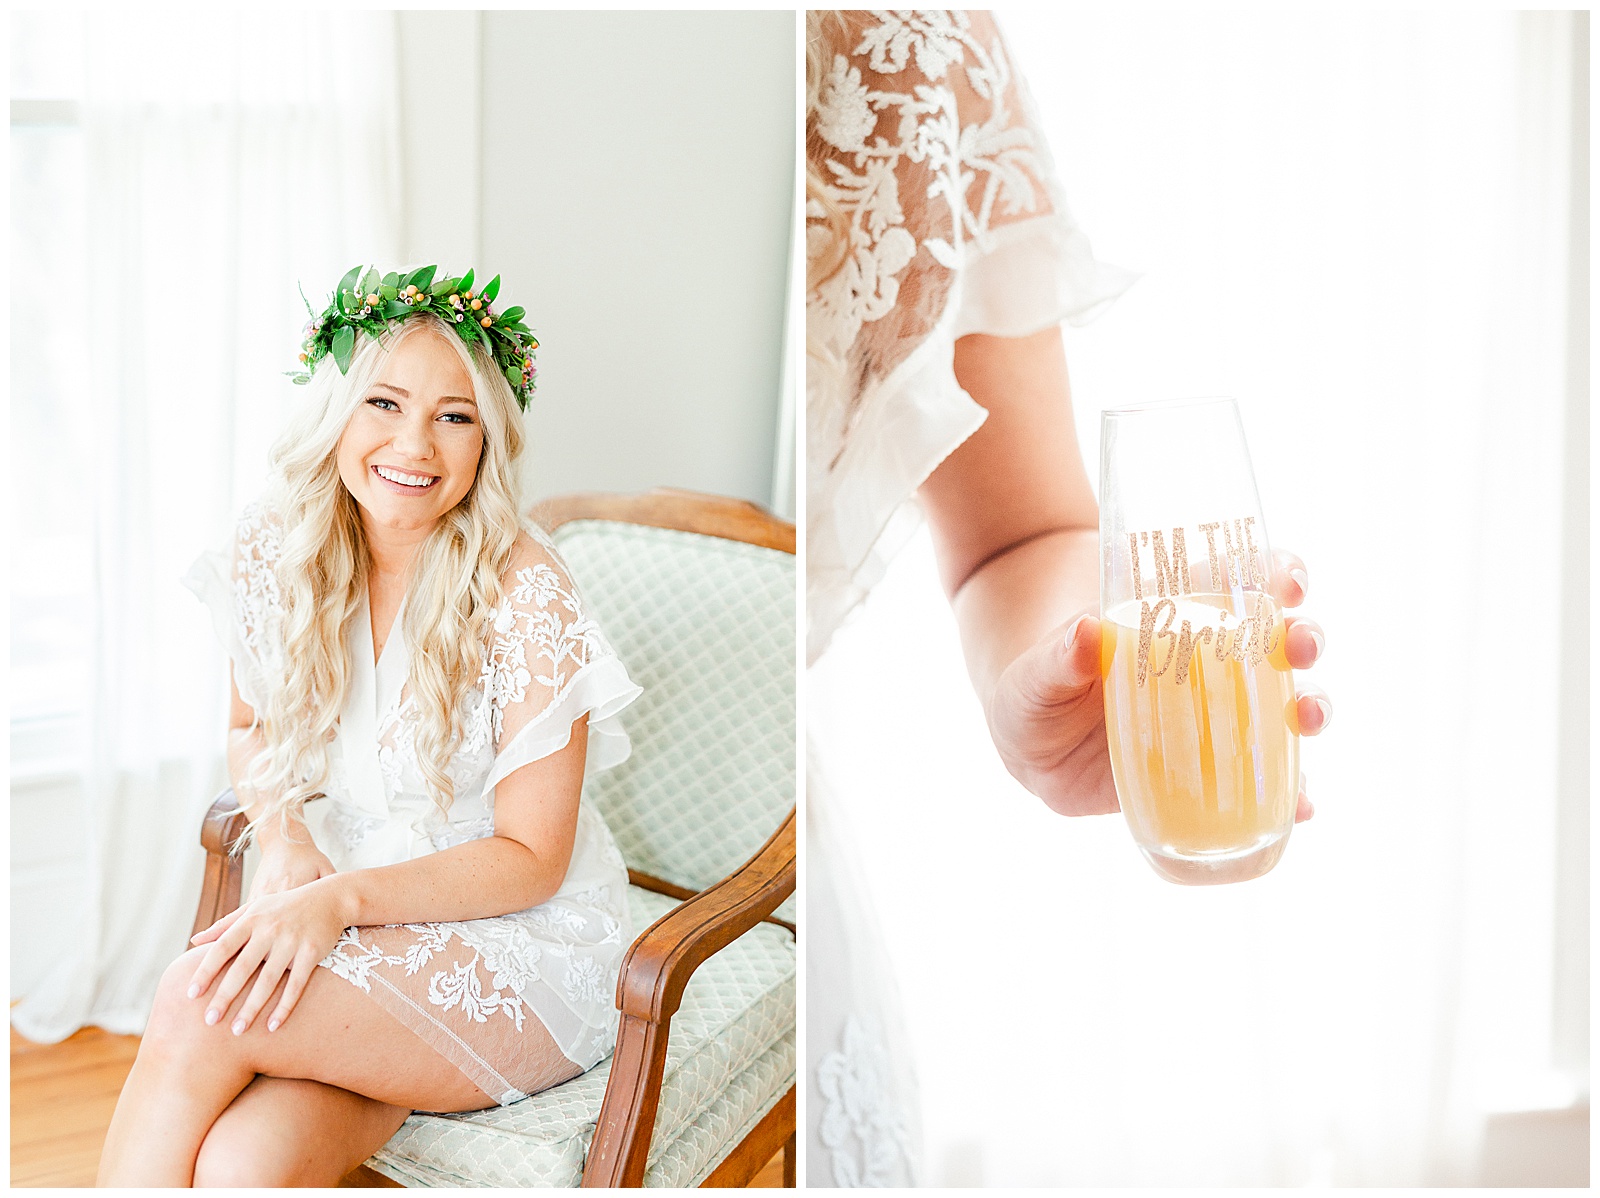 Bohemian Bride Getting Ready - Bright Boho Chic Theme in Charlotte, North Carolina | check out the full wedding at KevynDixonPhoto.com